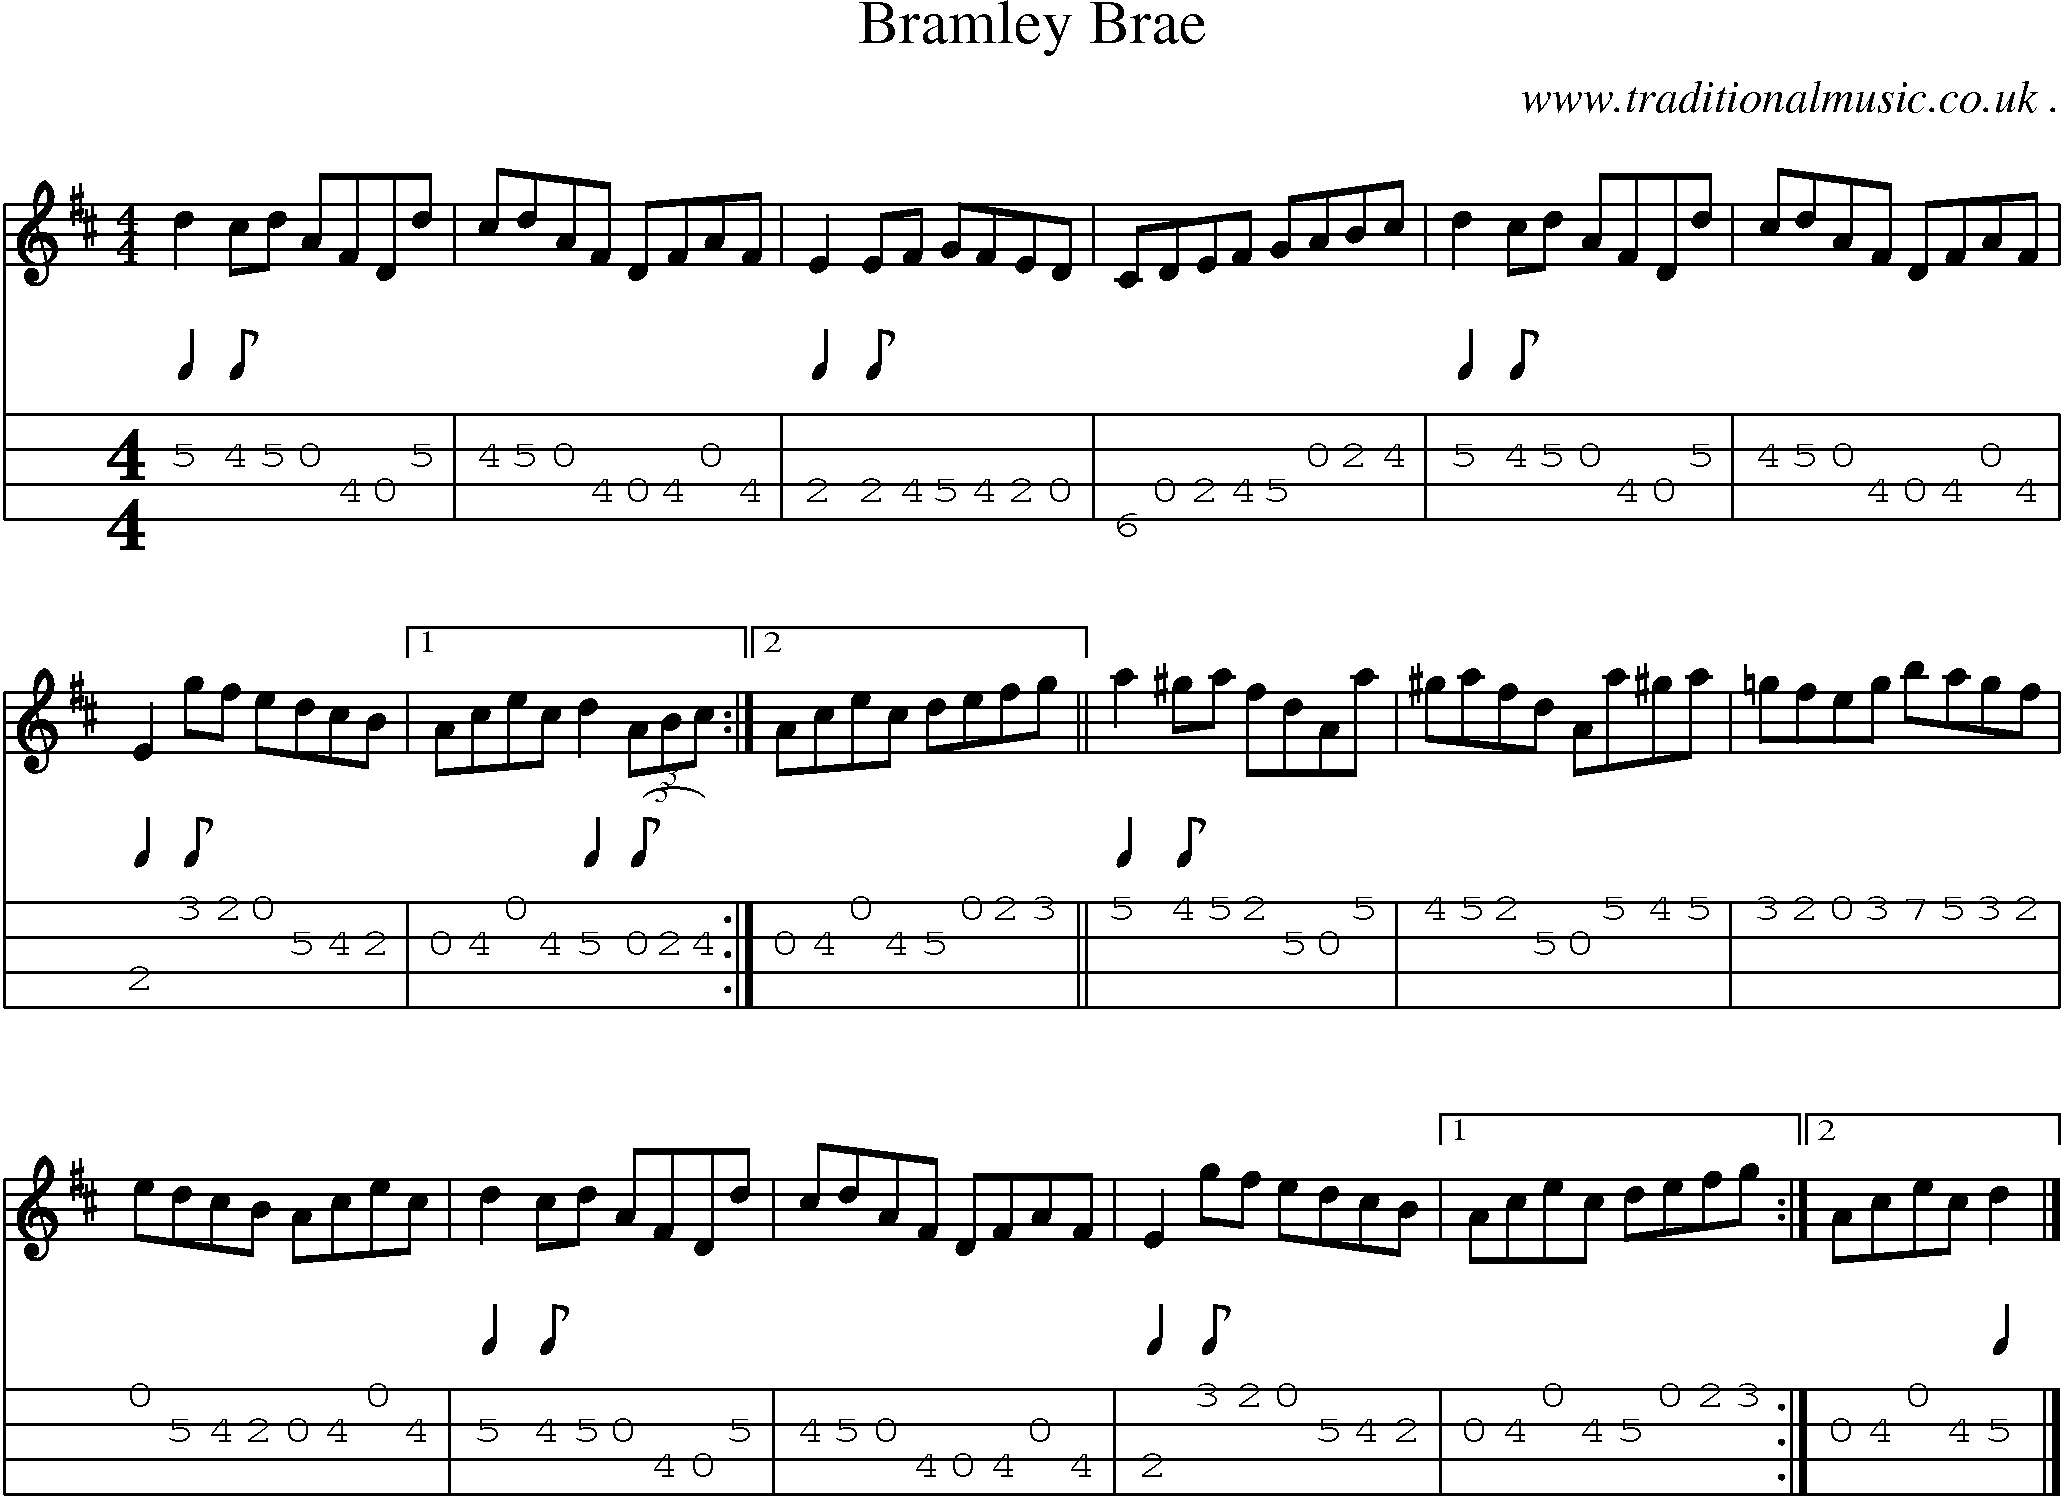 Sheet-music  score, Chords and Mandolin Tabs for Bramley Brae